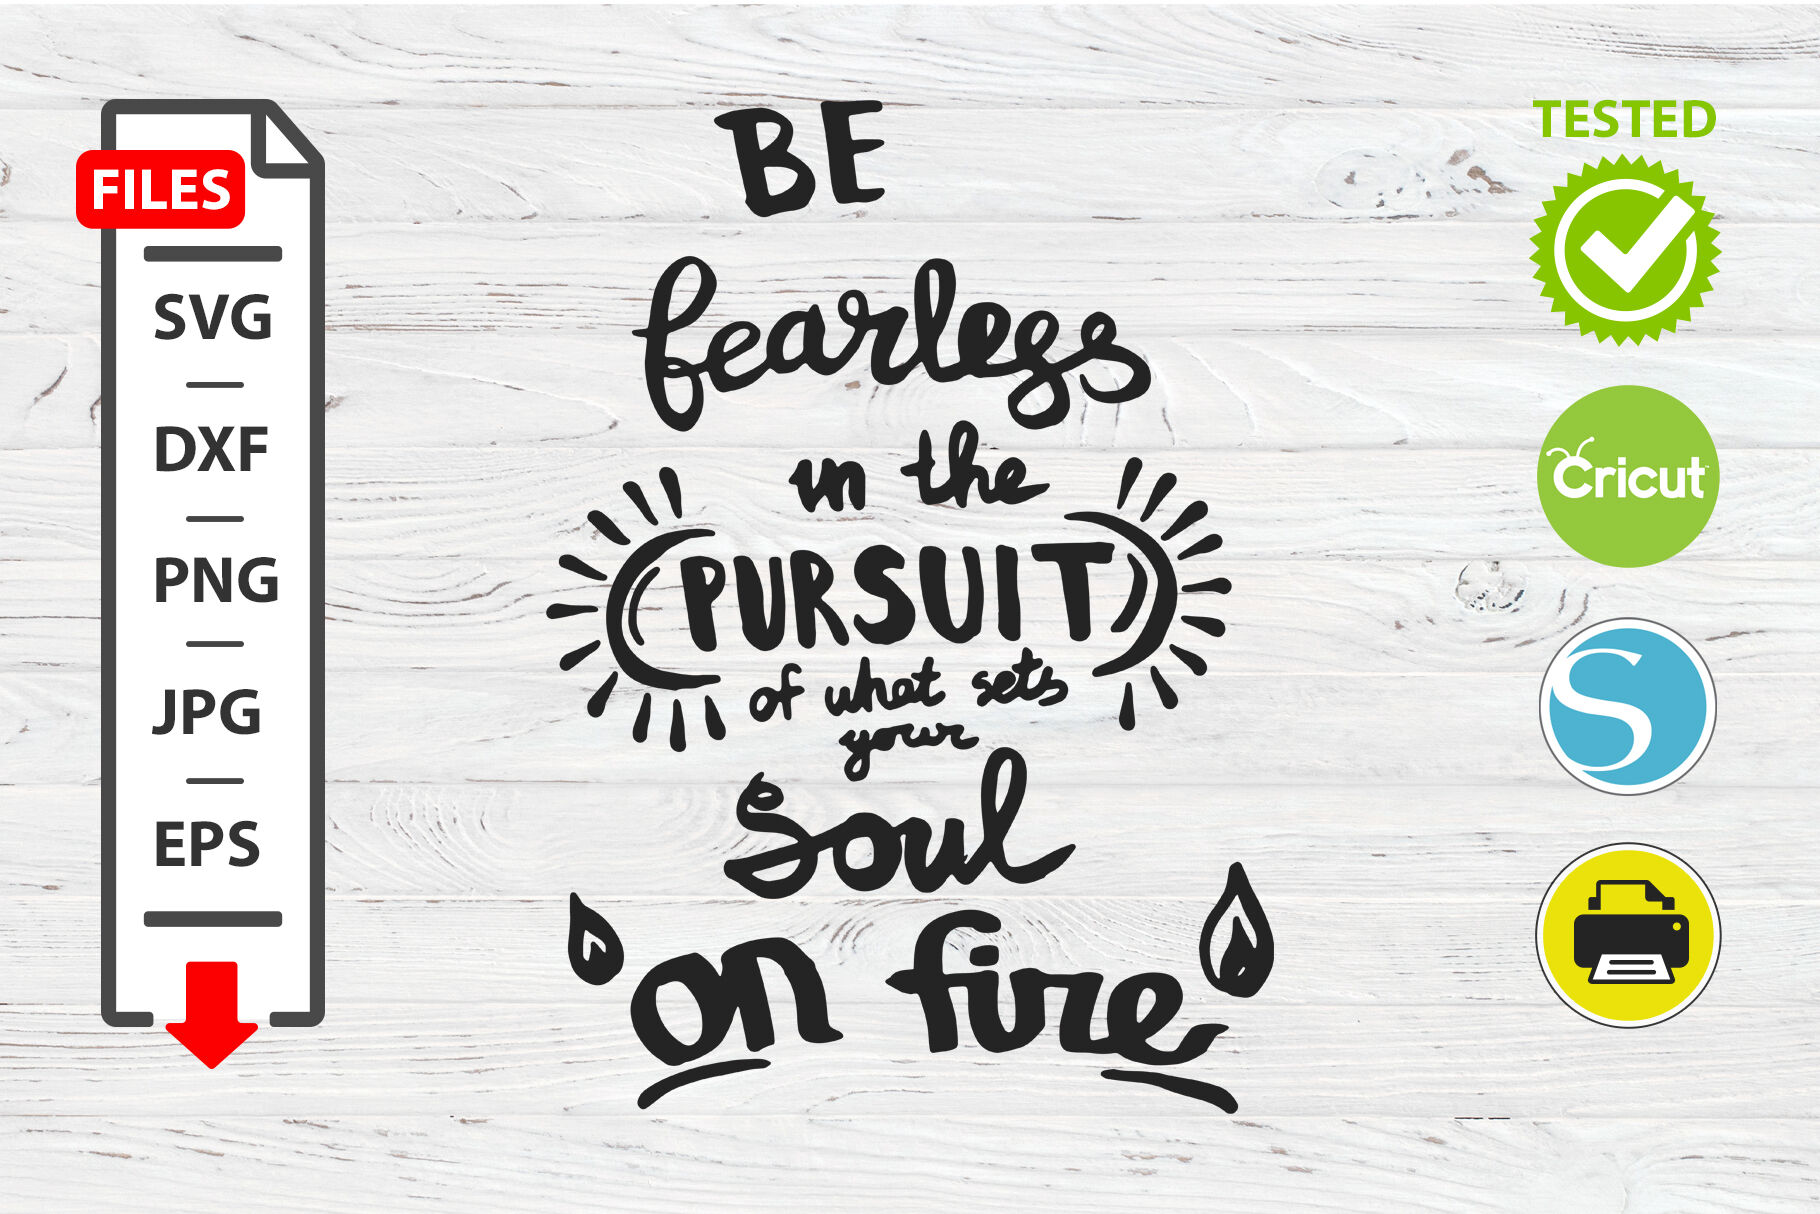 ori 3632584 dmfe38eqacnf8tojuf0s4vw3a9c6r3drcgzx27zv the soul on fire motivational quote svg cricut silhouette design